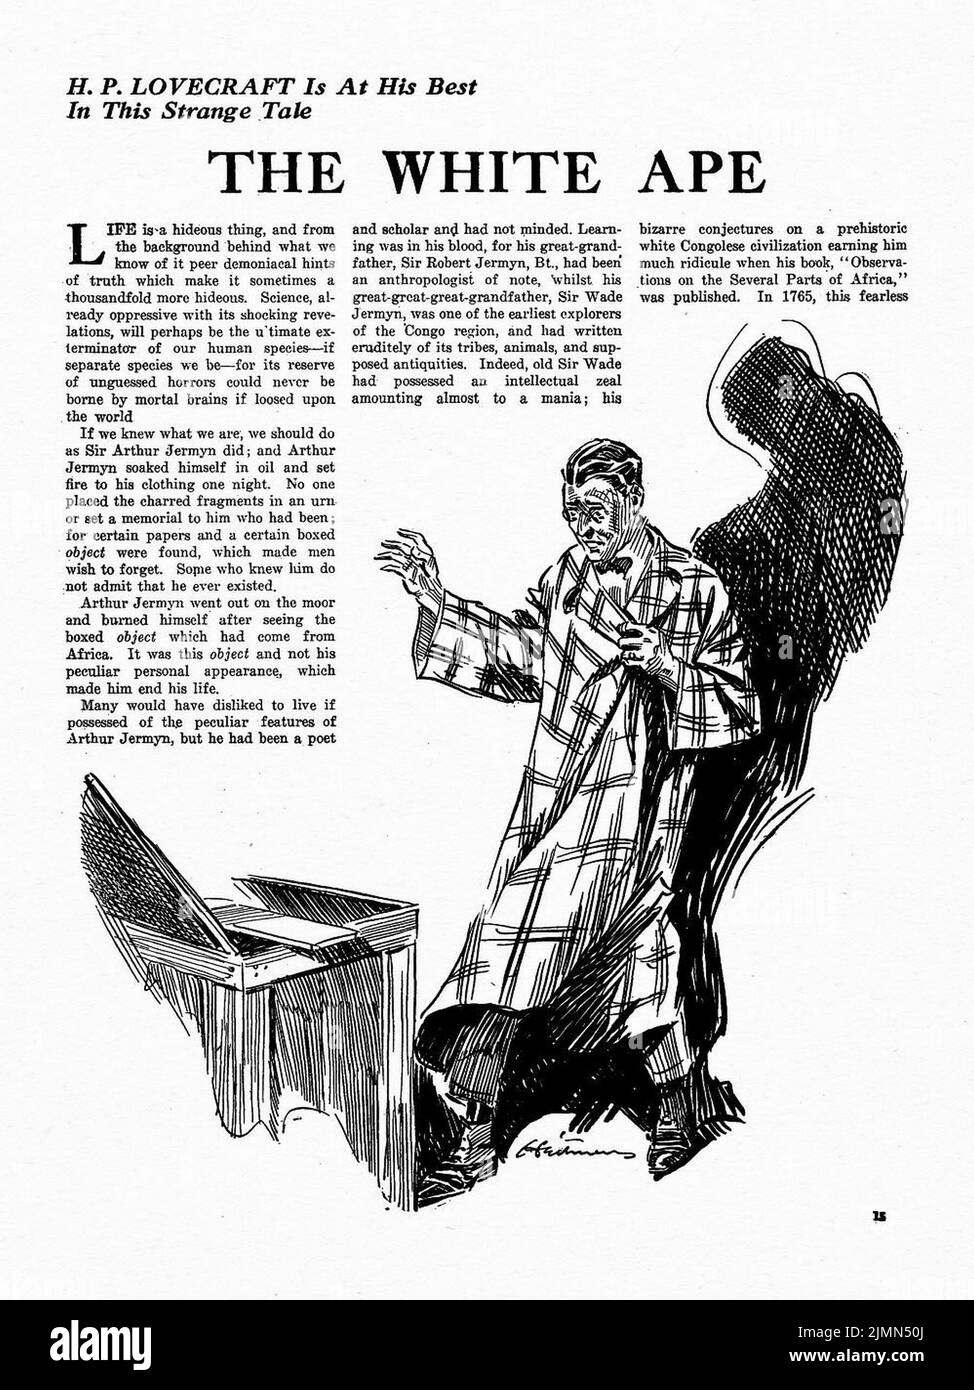 The White Ape (1921) by H. P. Lovecraft. Illustration by William Fred Heitman from Weird Tales, April 1924 Stock Photo